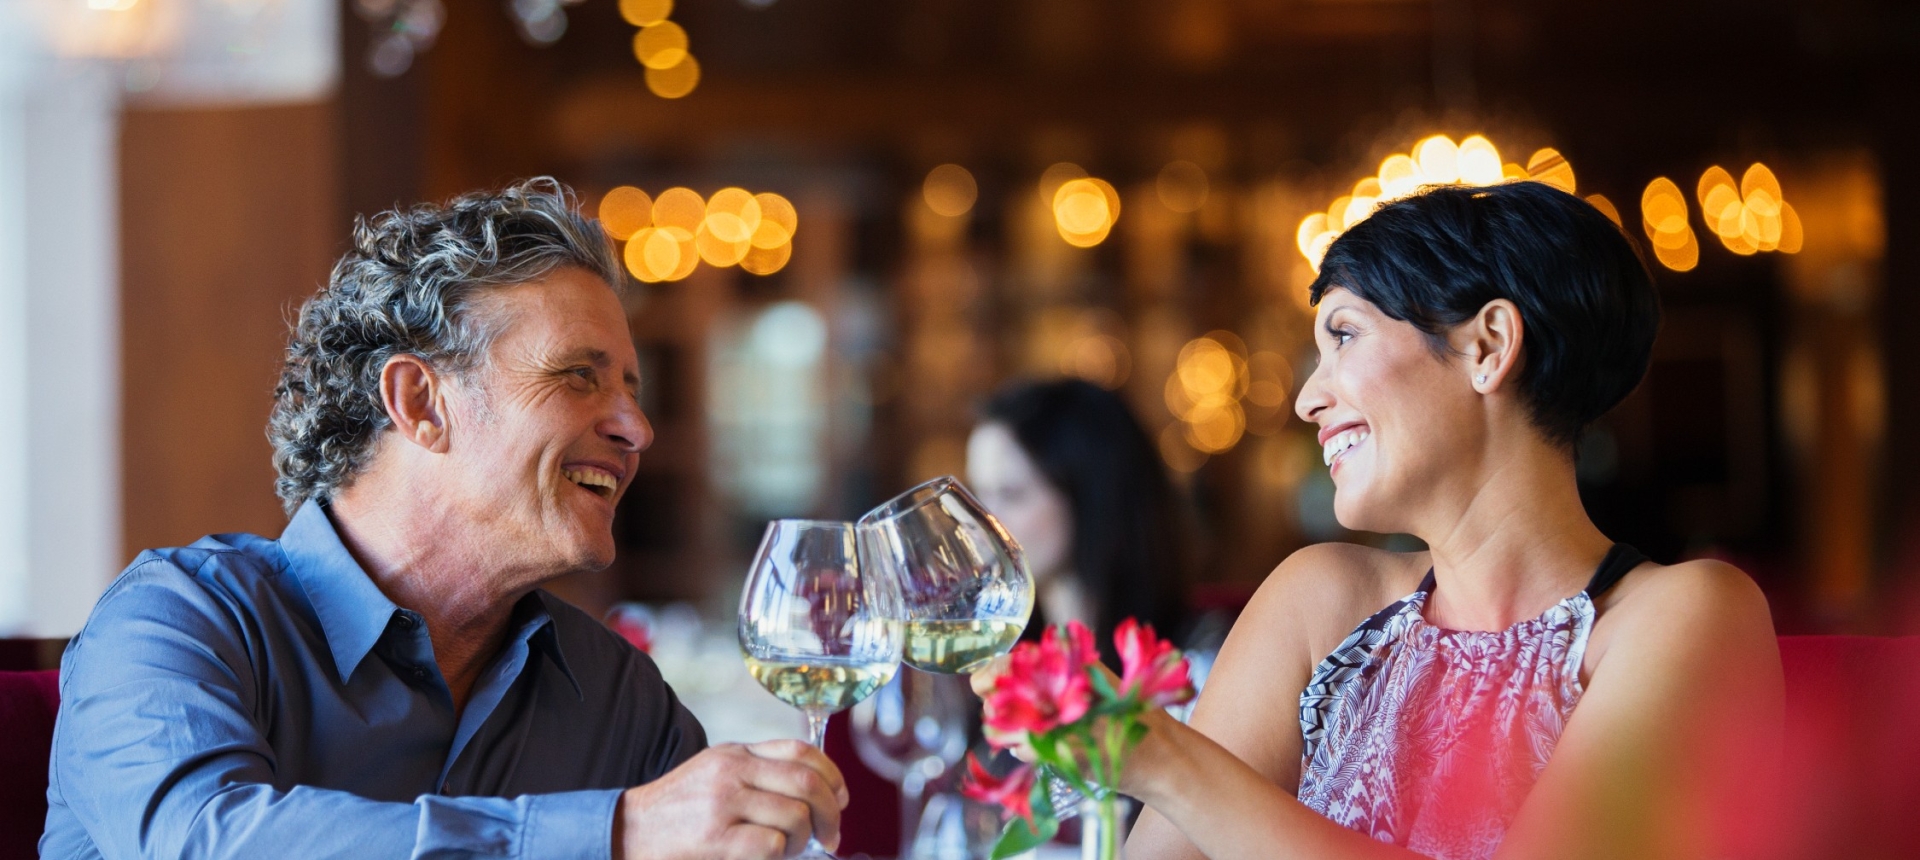 A man and woman celebrating over dinner and enjoying glasses of wine.